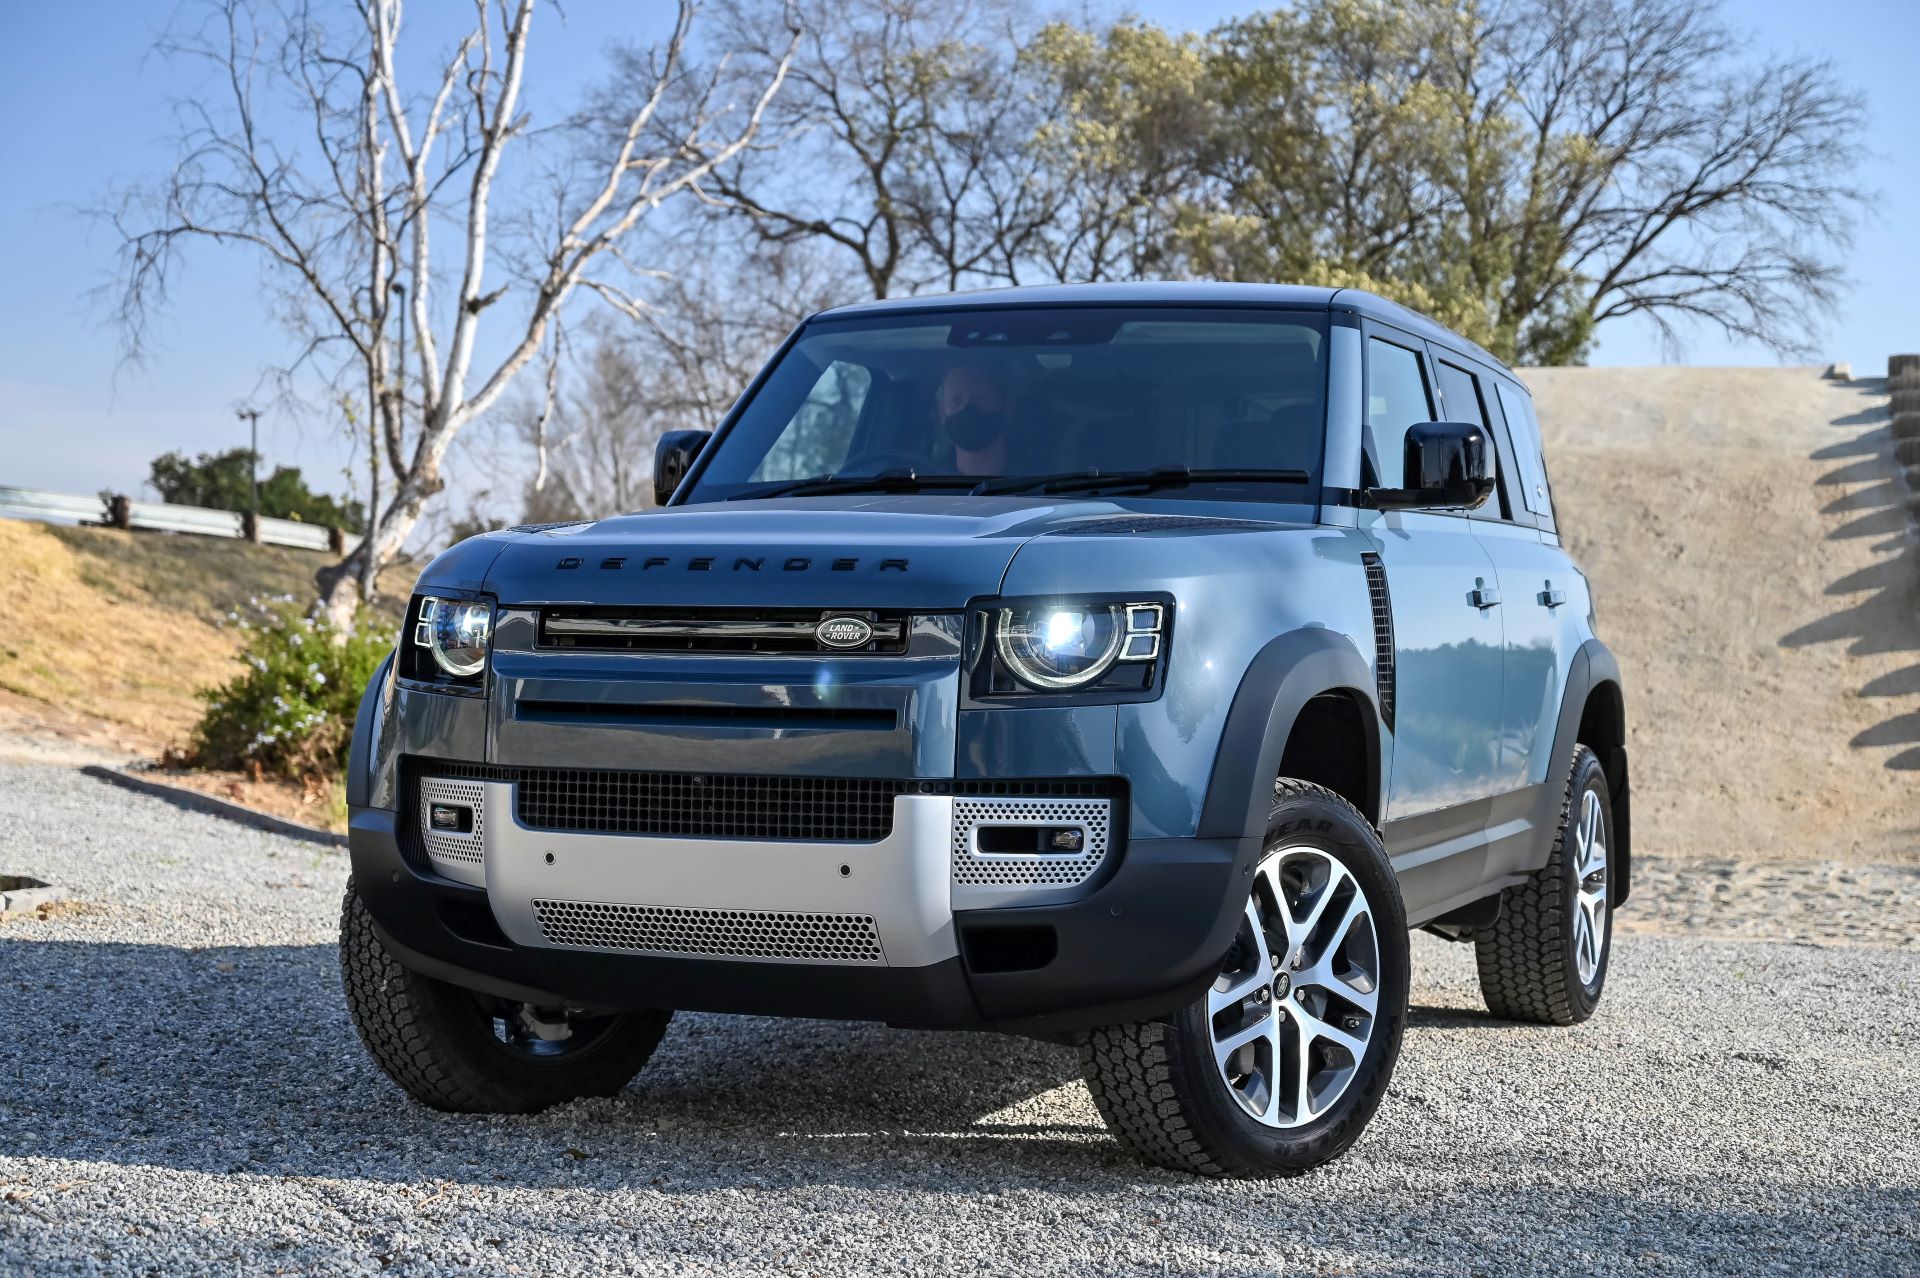 Defender’s South African clients embrace modern luxury blend of capability, comfort and convenience